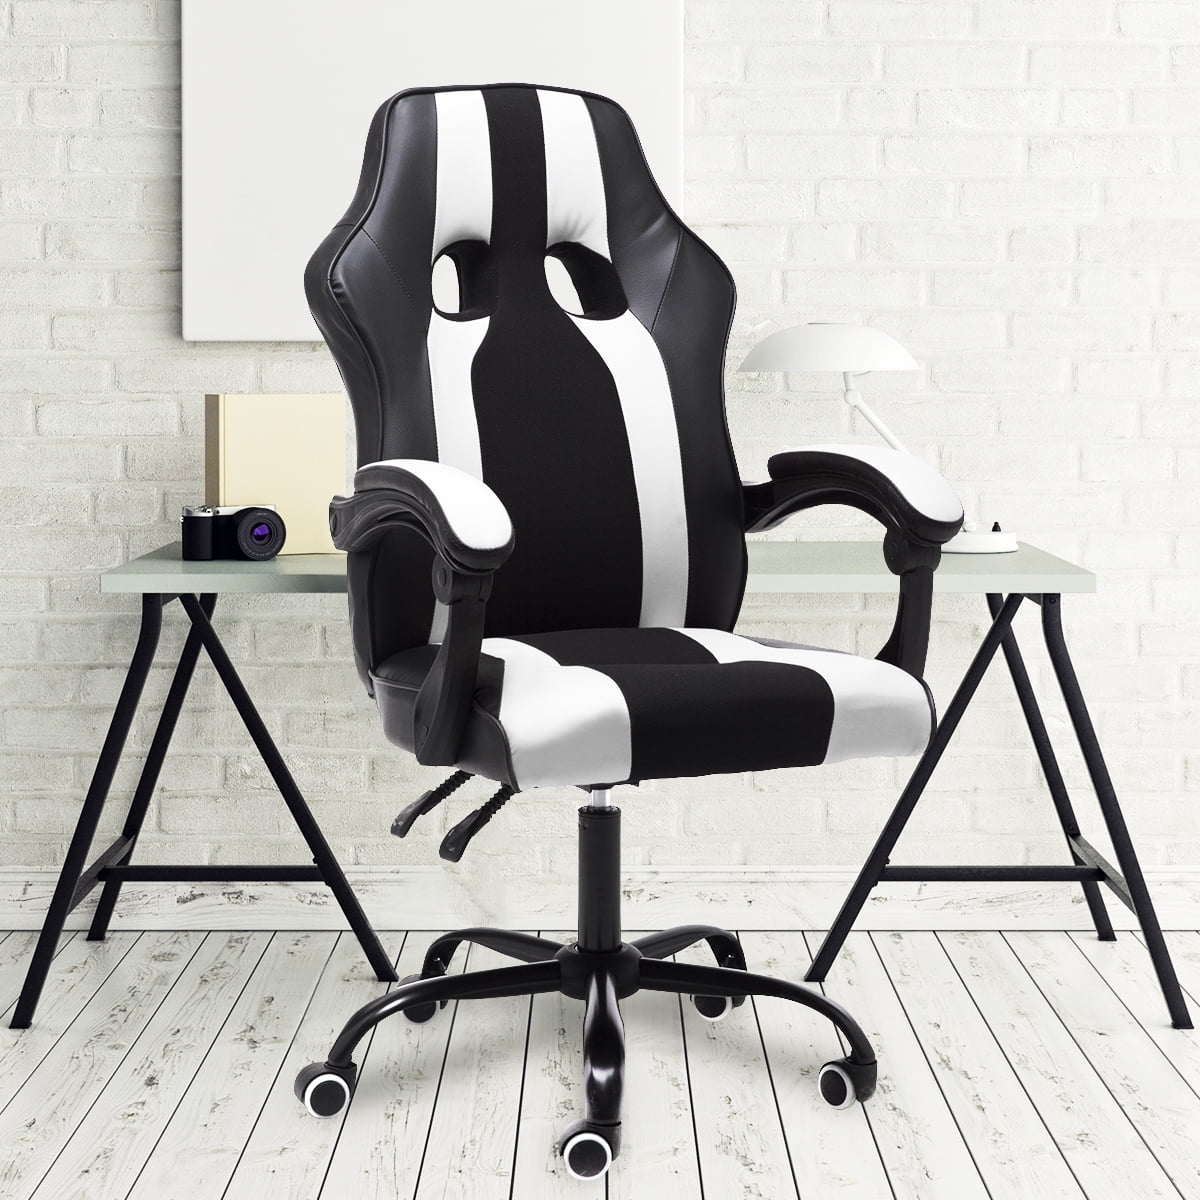 Details about   Ergonomic Gaming Racing Chair Computer Desk Seat Leather Swivel Office Furniture 